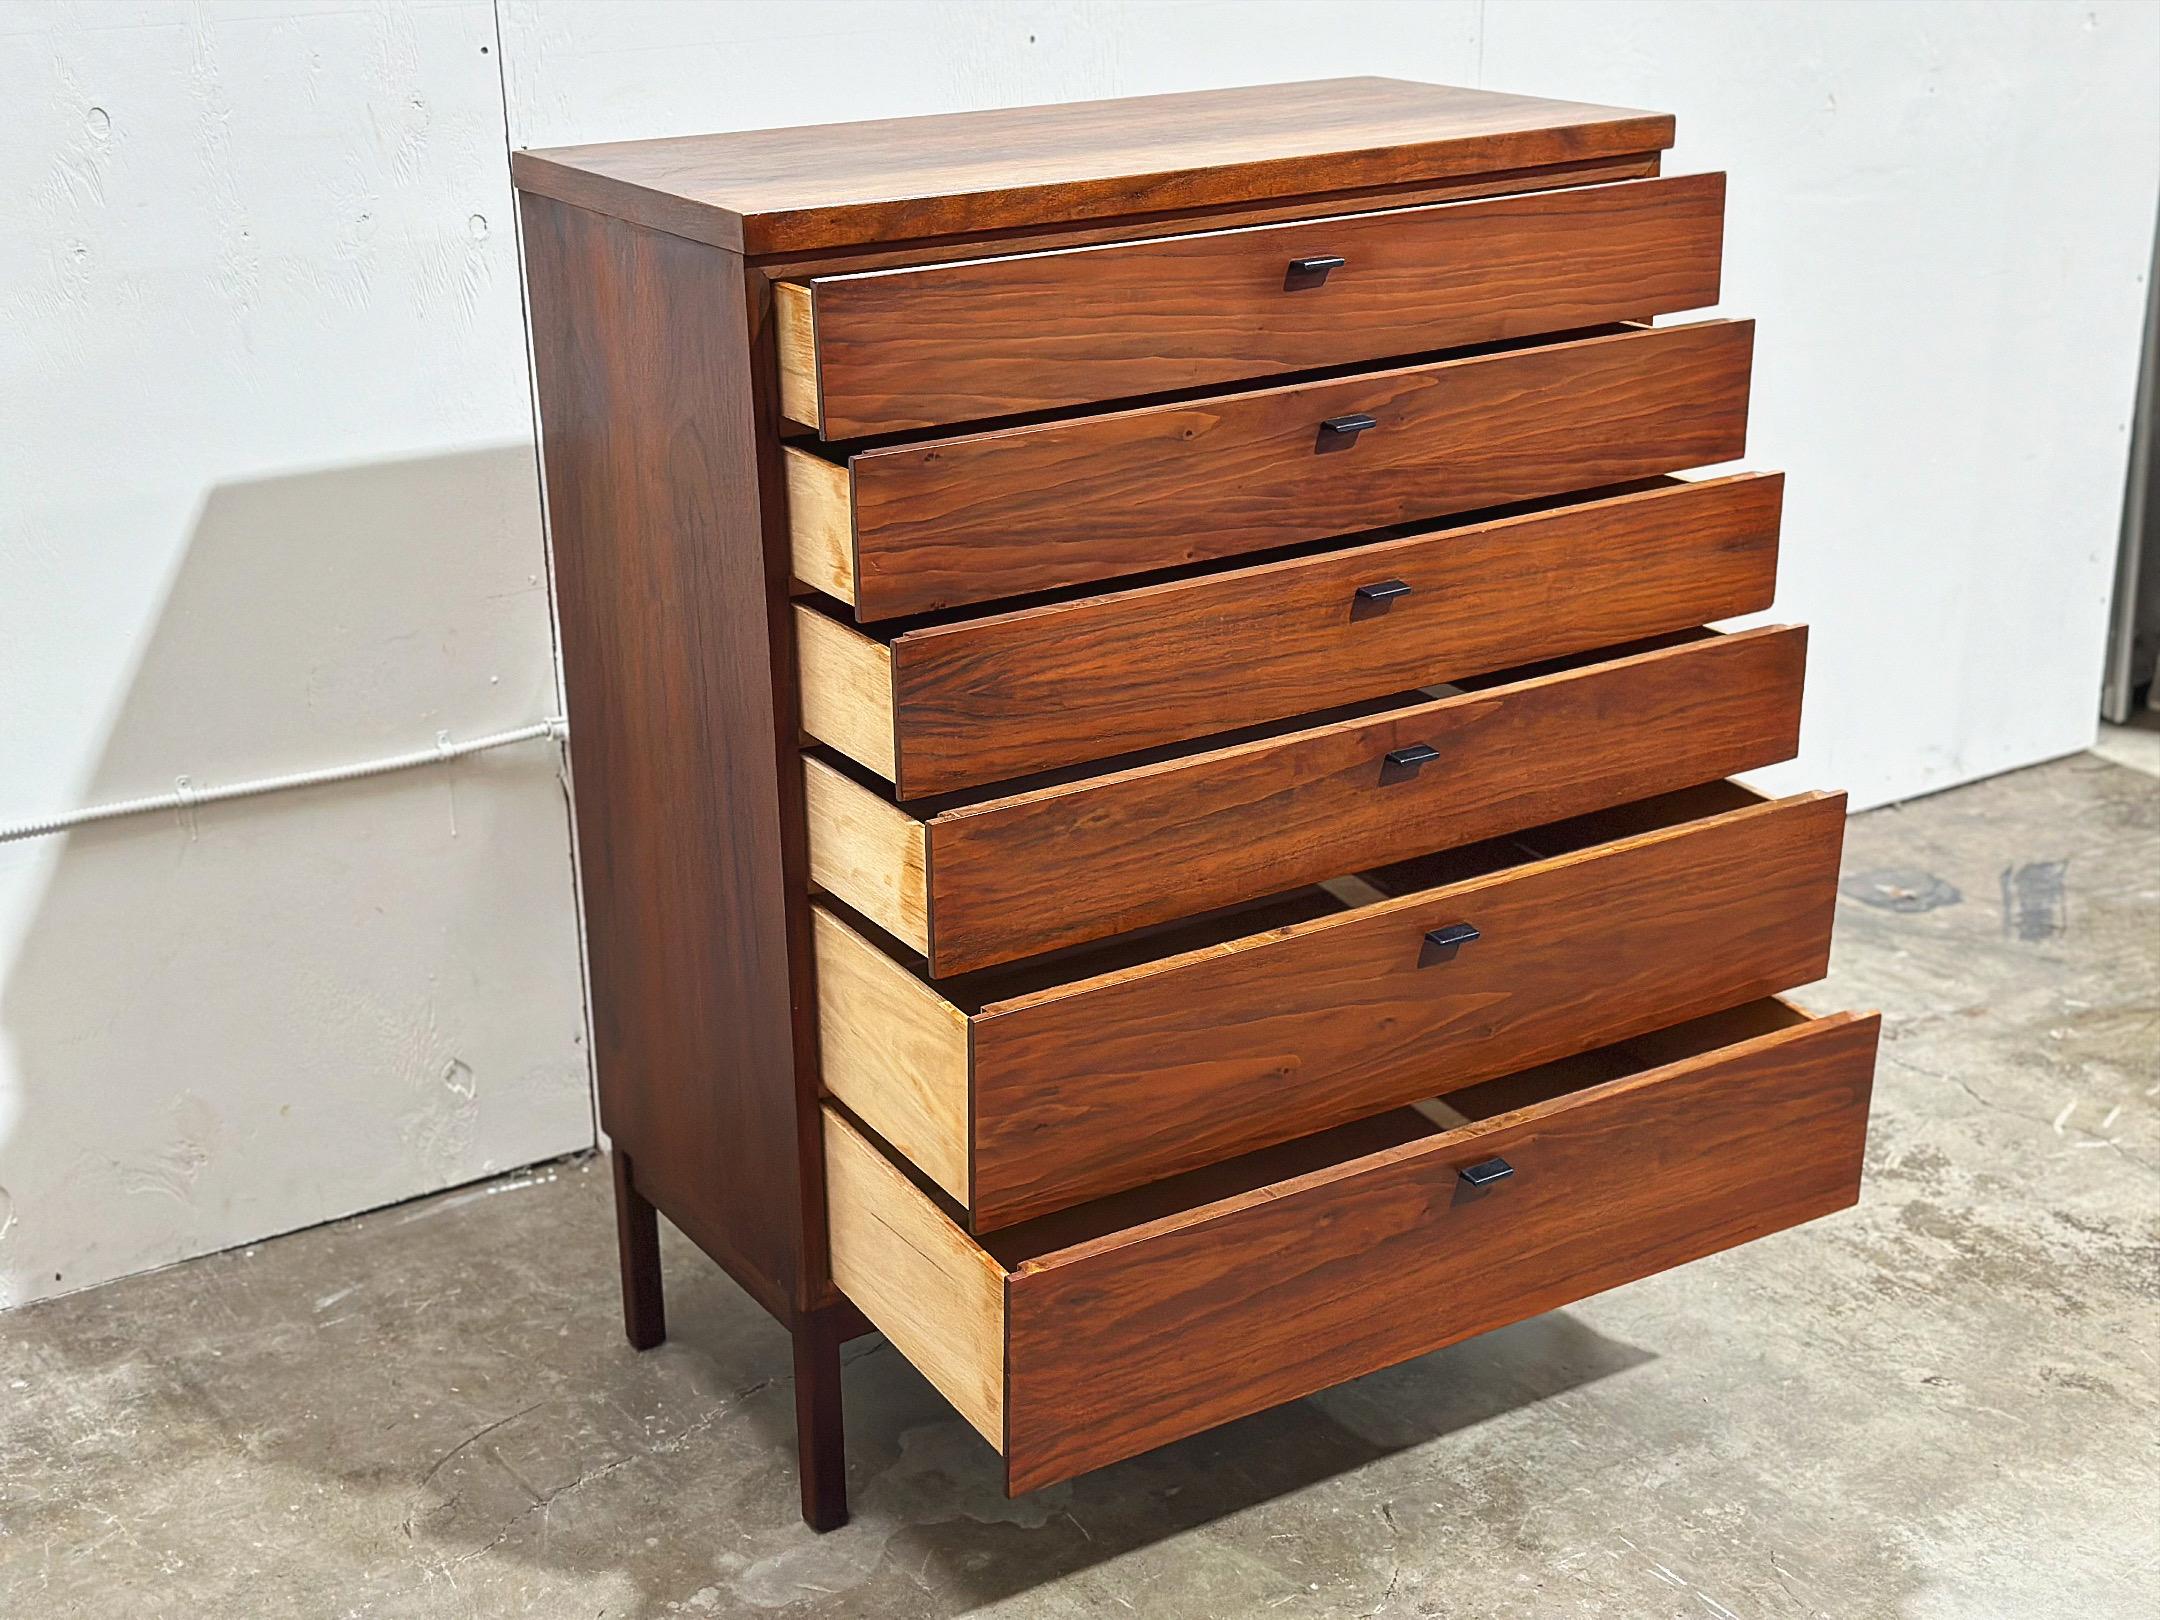 Walnut Midcentury Dresser - Jack Cartwright - Founders Patterns 10 - Tall Highboy Chest For Sale